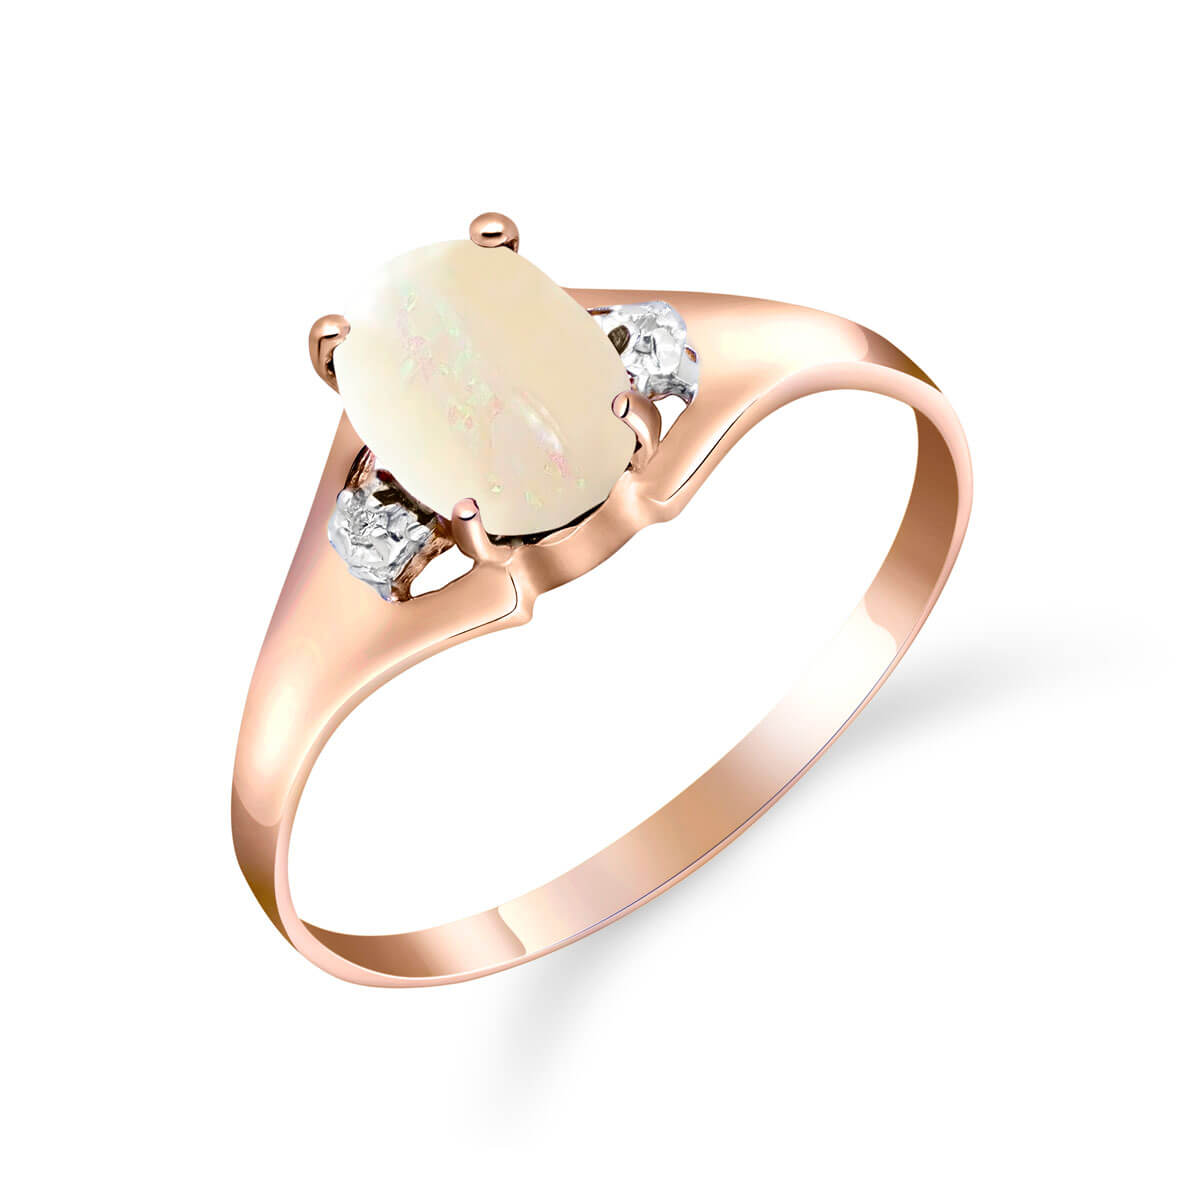 Opal & Diamond Desire Ring in 9ct Rose Gold